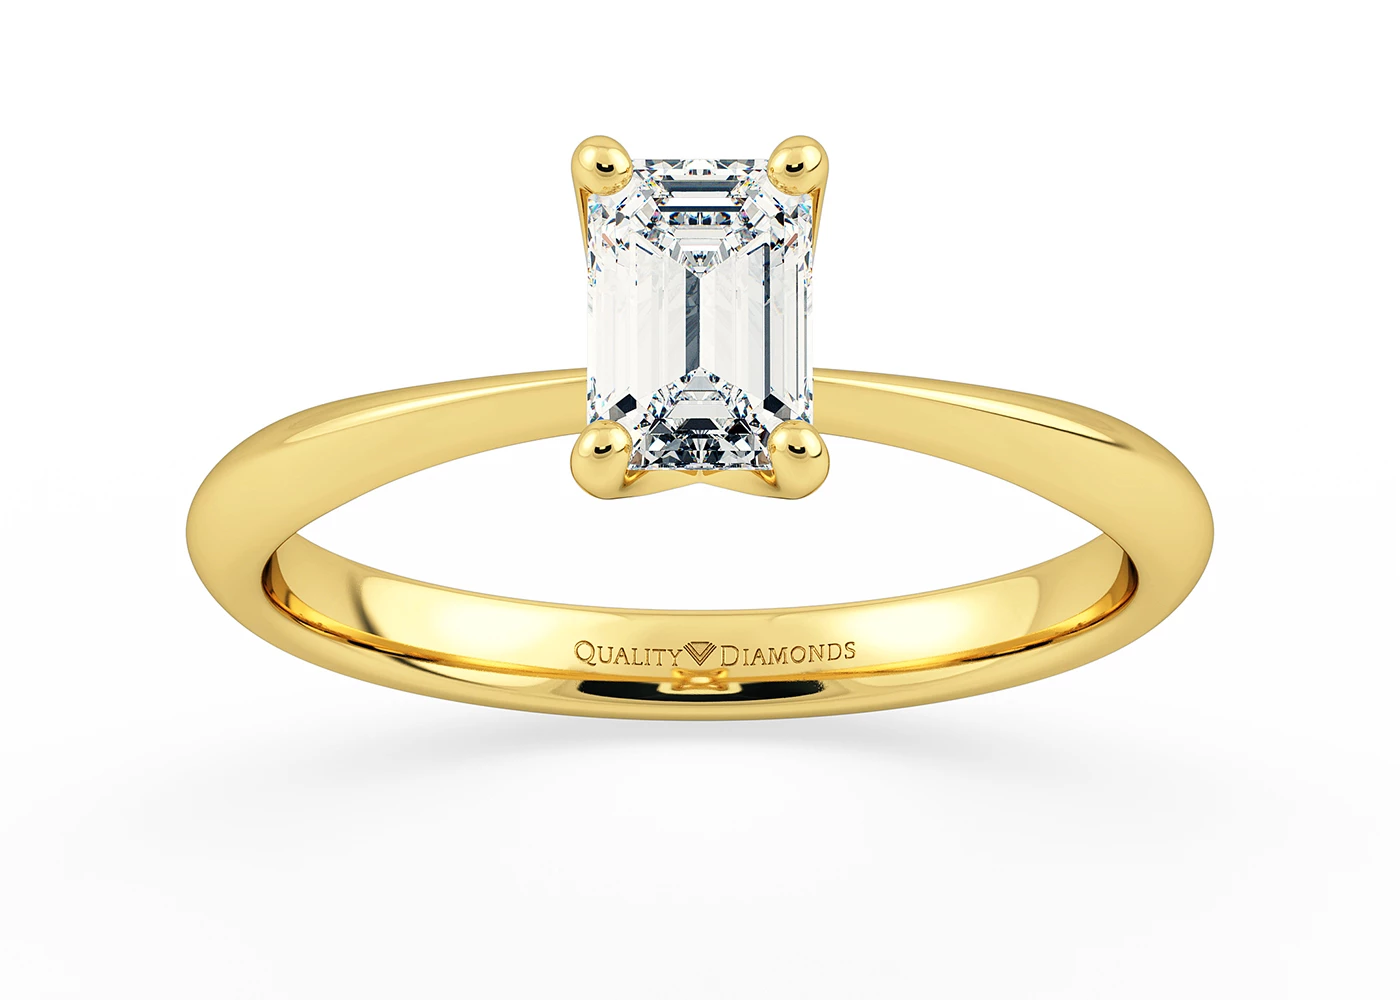 Two Carat Emerald Solitaire Diamond Engagement Ring in 18K Yellow Gold